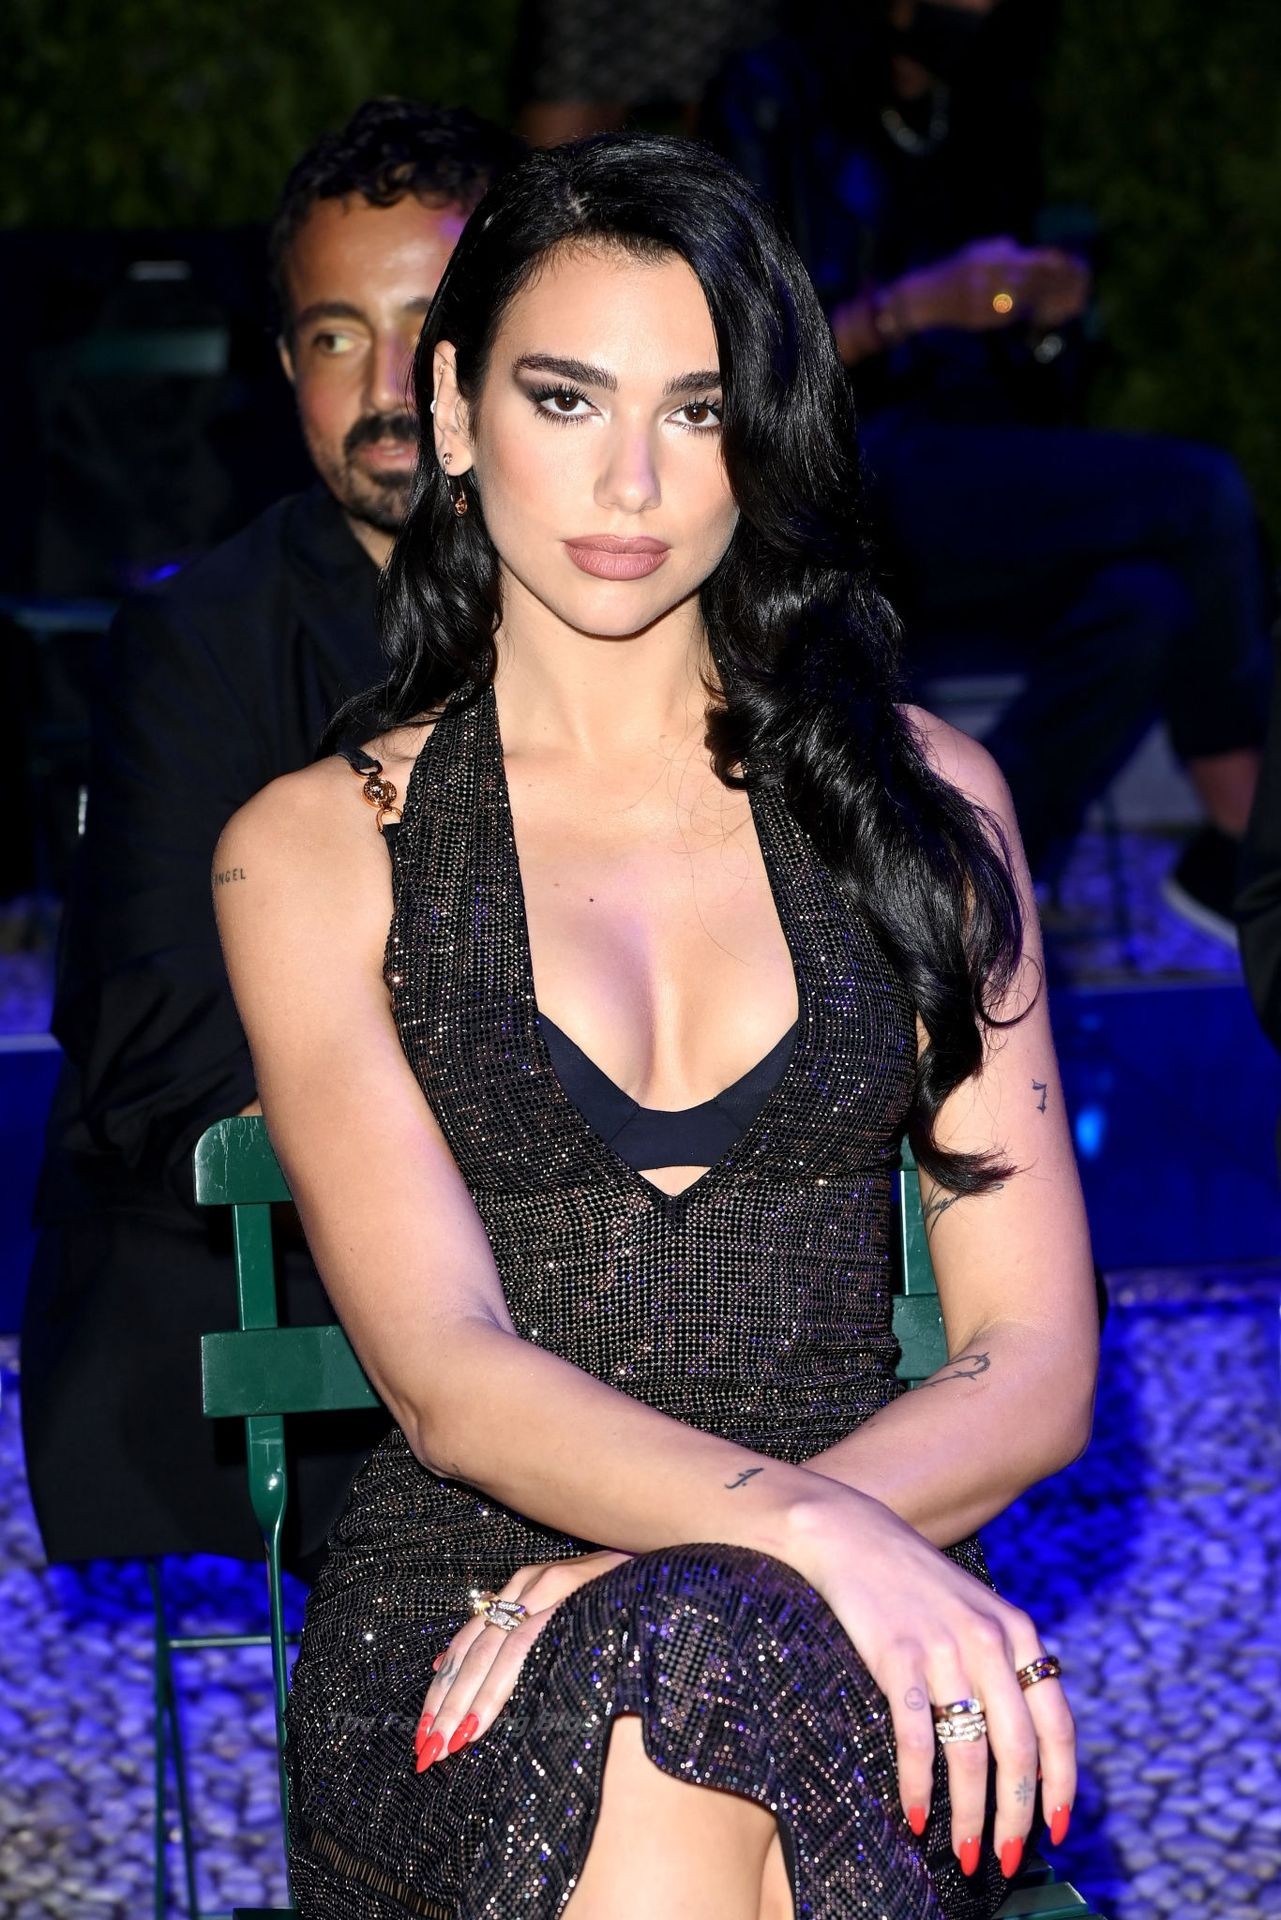 Dua Lipa Puts on a Sultry Display at the Versace-Fendi Fashion Show (110 Photos) [Updated]